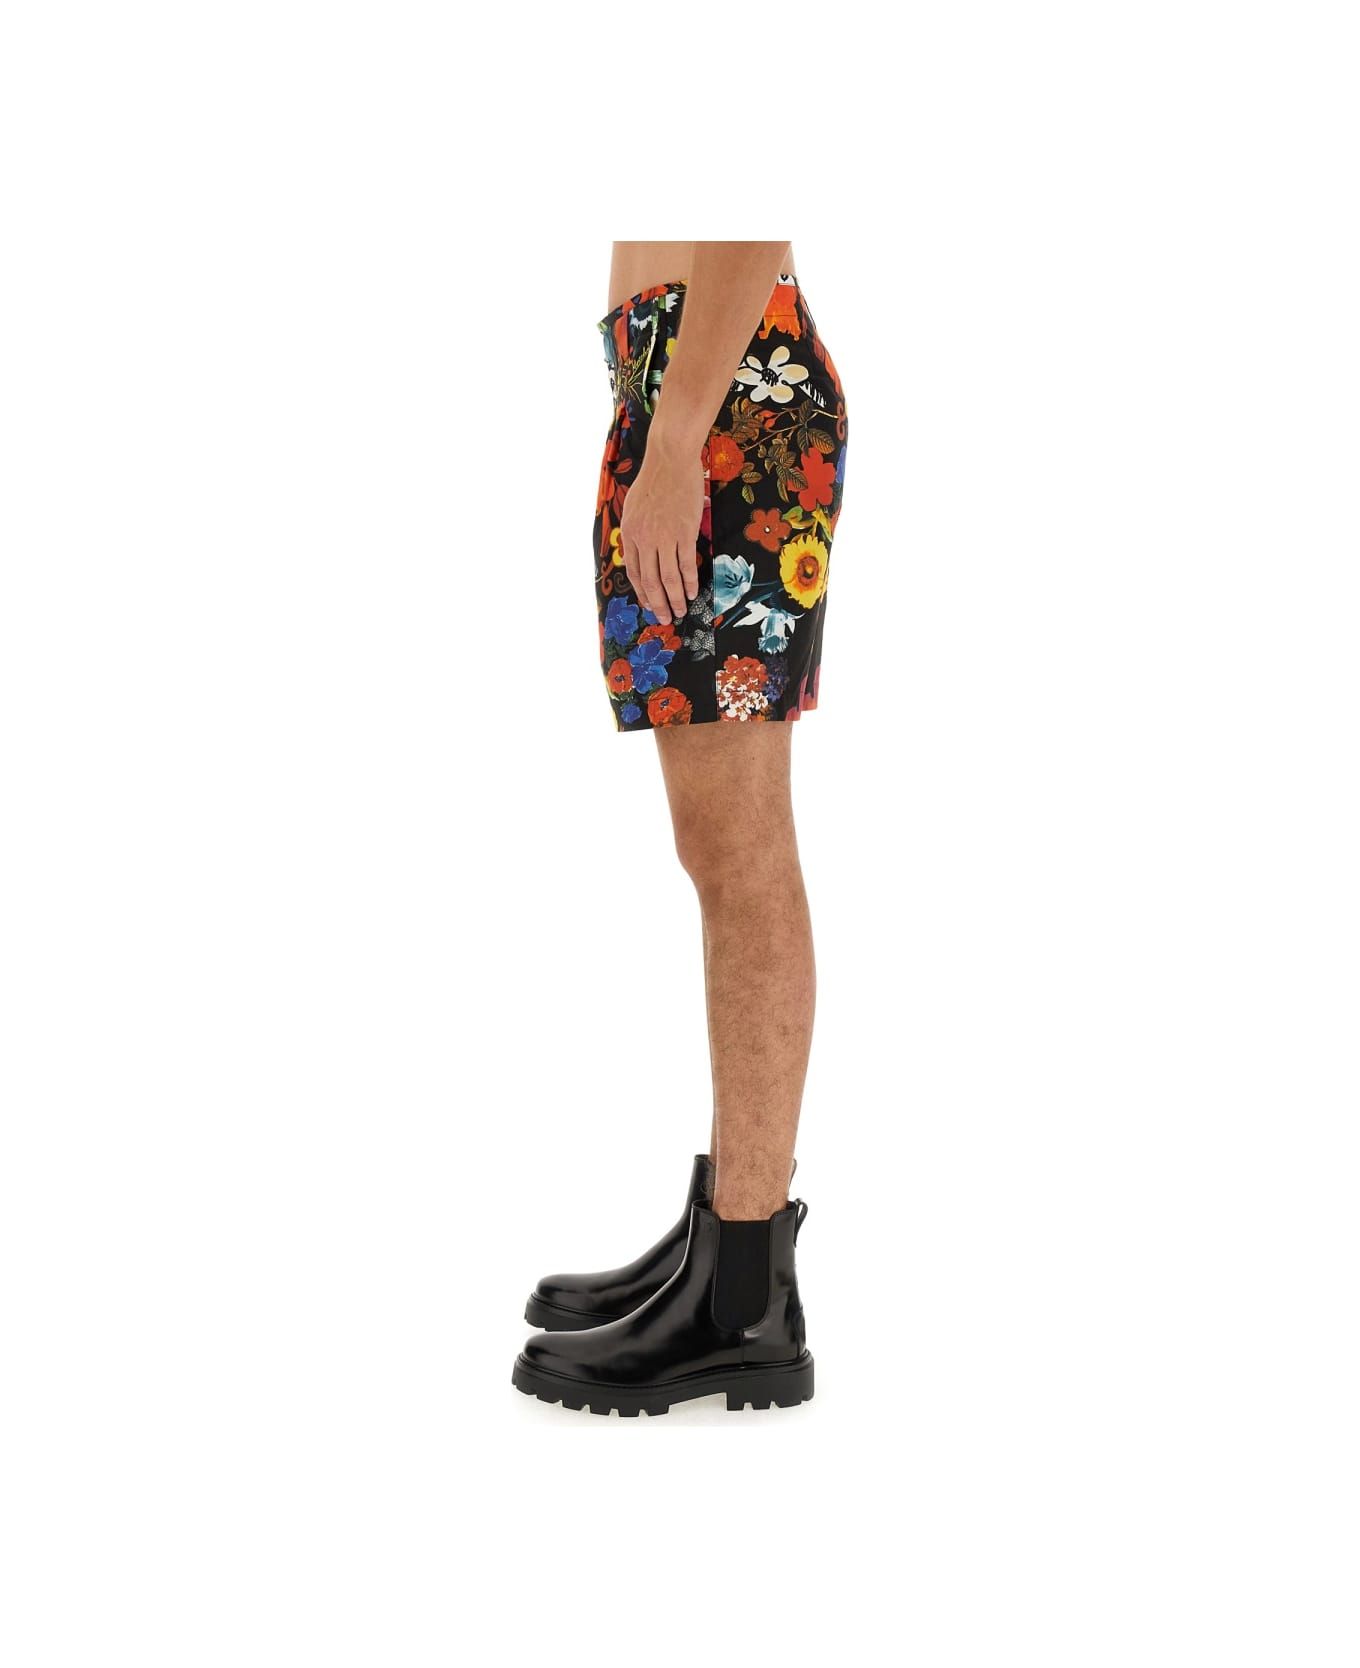 Moschino Bermuda With Floral Pattern - MULTICOLOUR